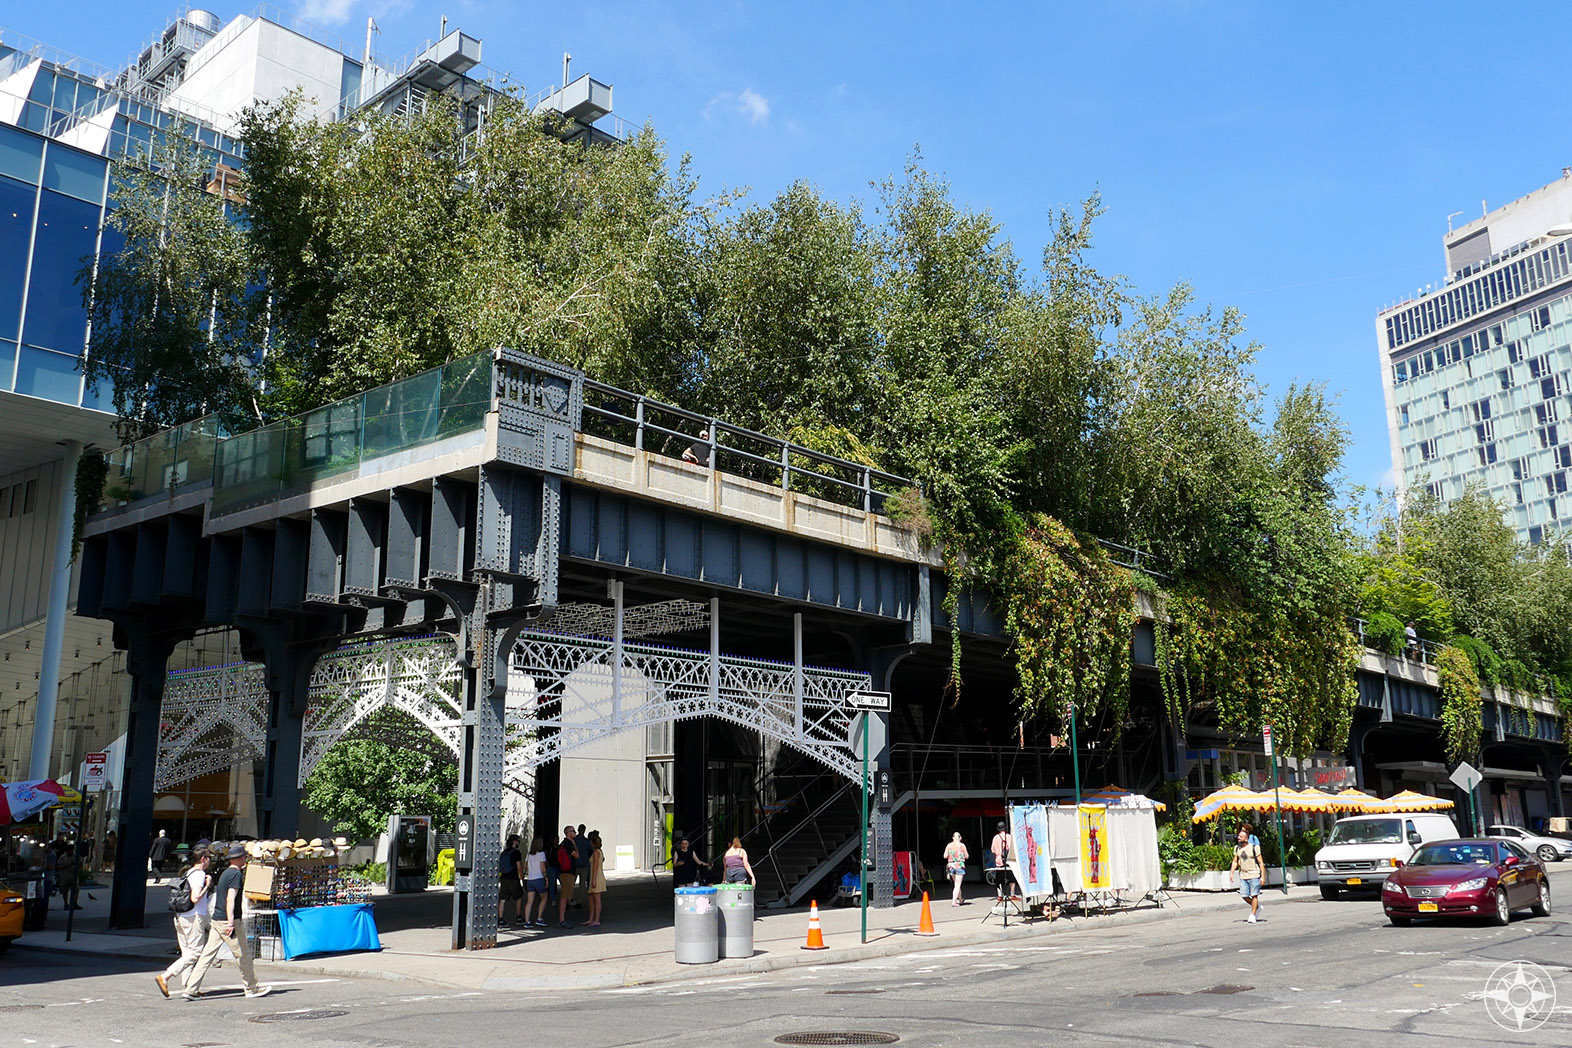 South end and entrance of The High Line at Gansevoort Street in the Meatpacking District.